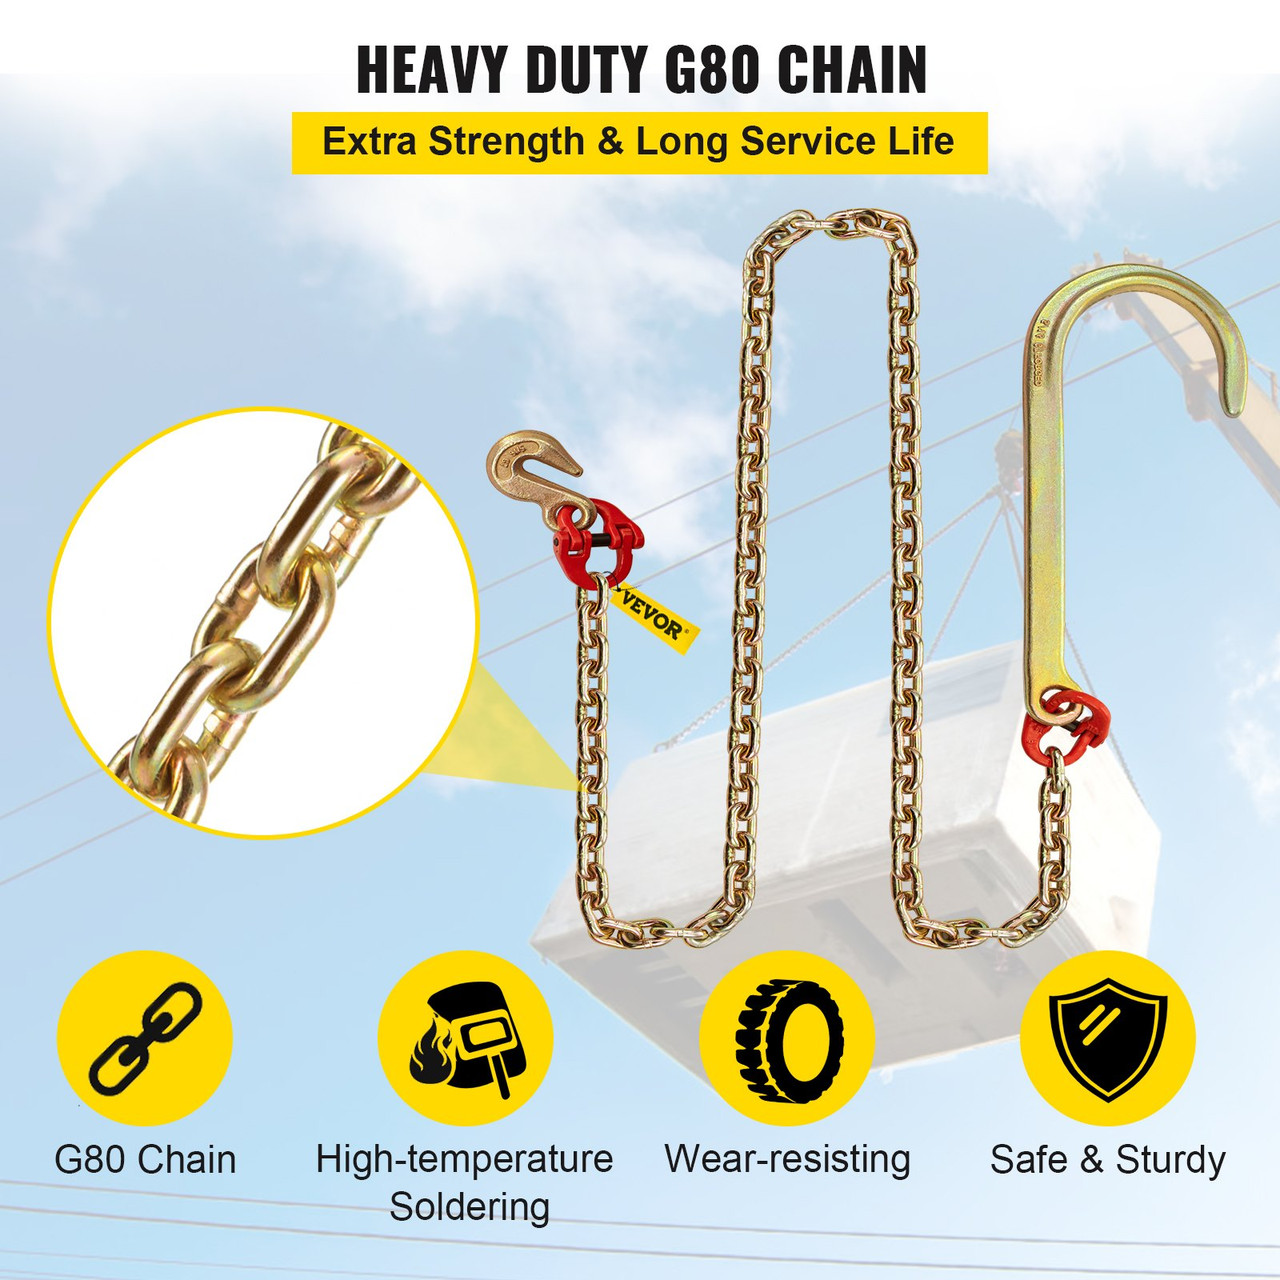 J Hook Chain, 5/16 in x 8 ft Tow Chain Bridle, Grade 80 J Hook Transport Chain, 9260 Lbs Break Strength with J Hook & Grab Hook, Tow Hooks for Trucks, Heavy Duty J Hook and Chain Shorteners